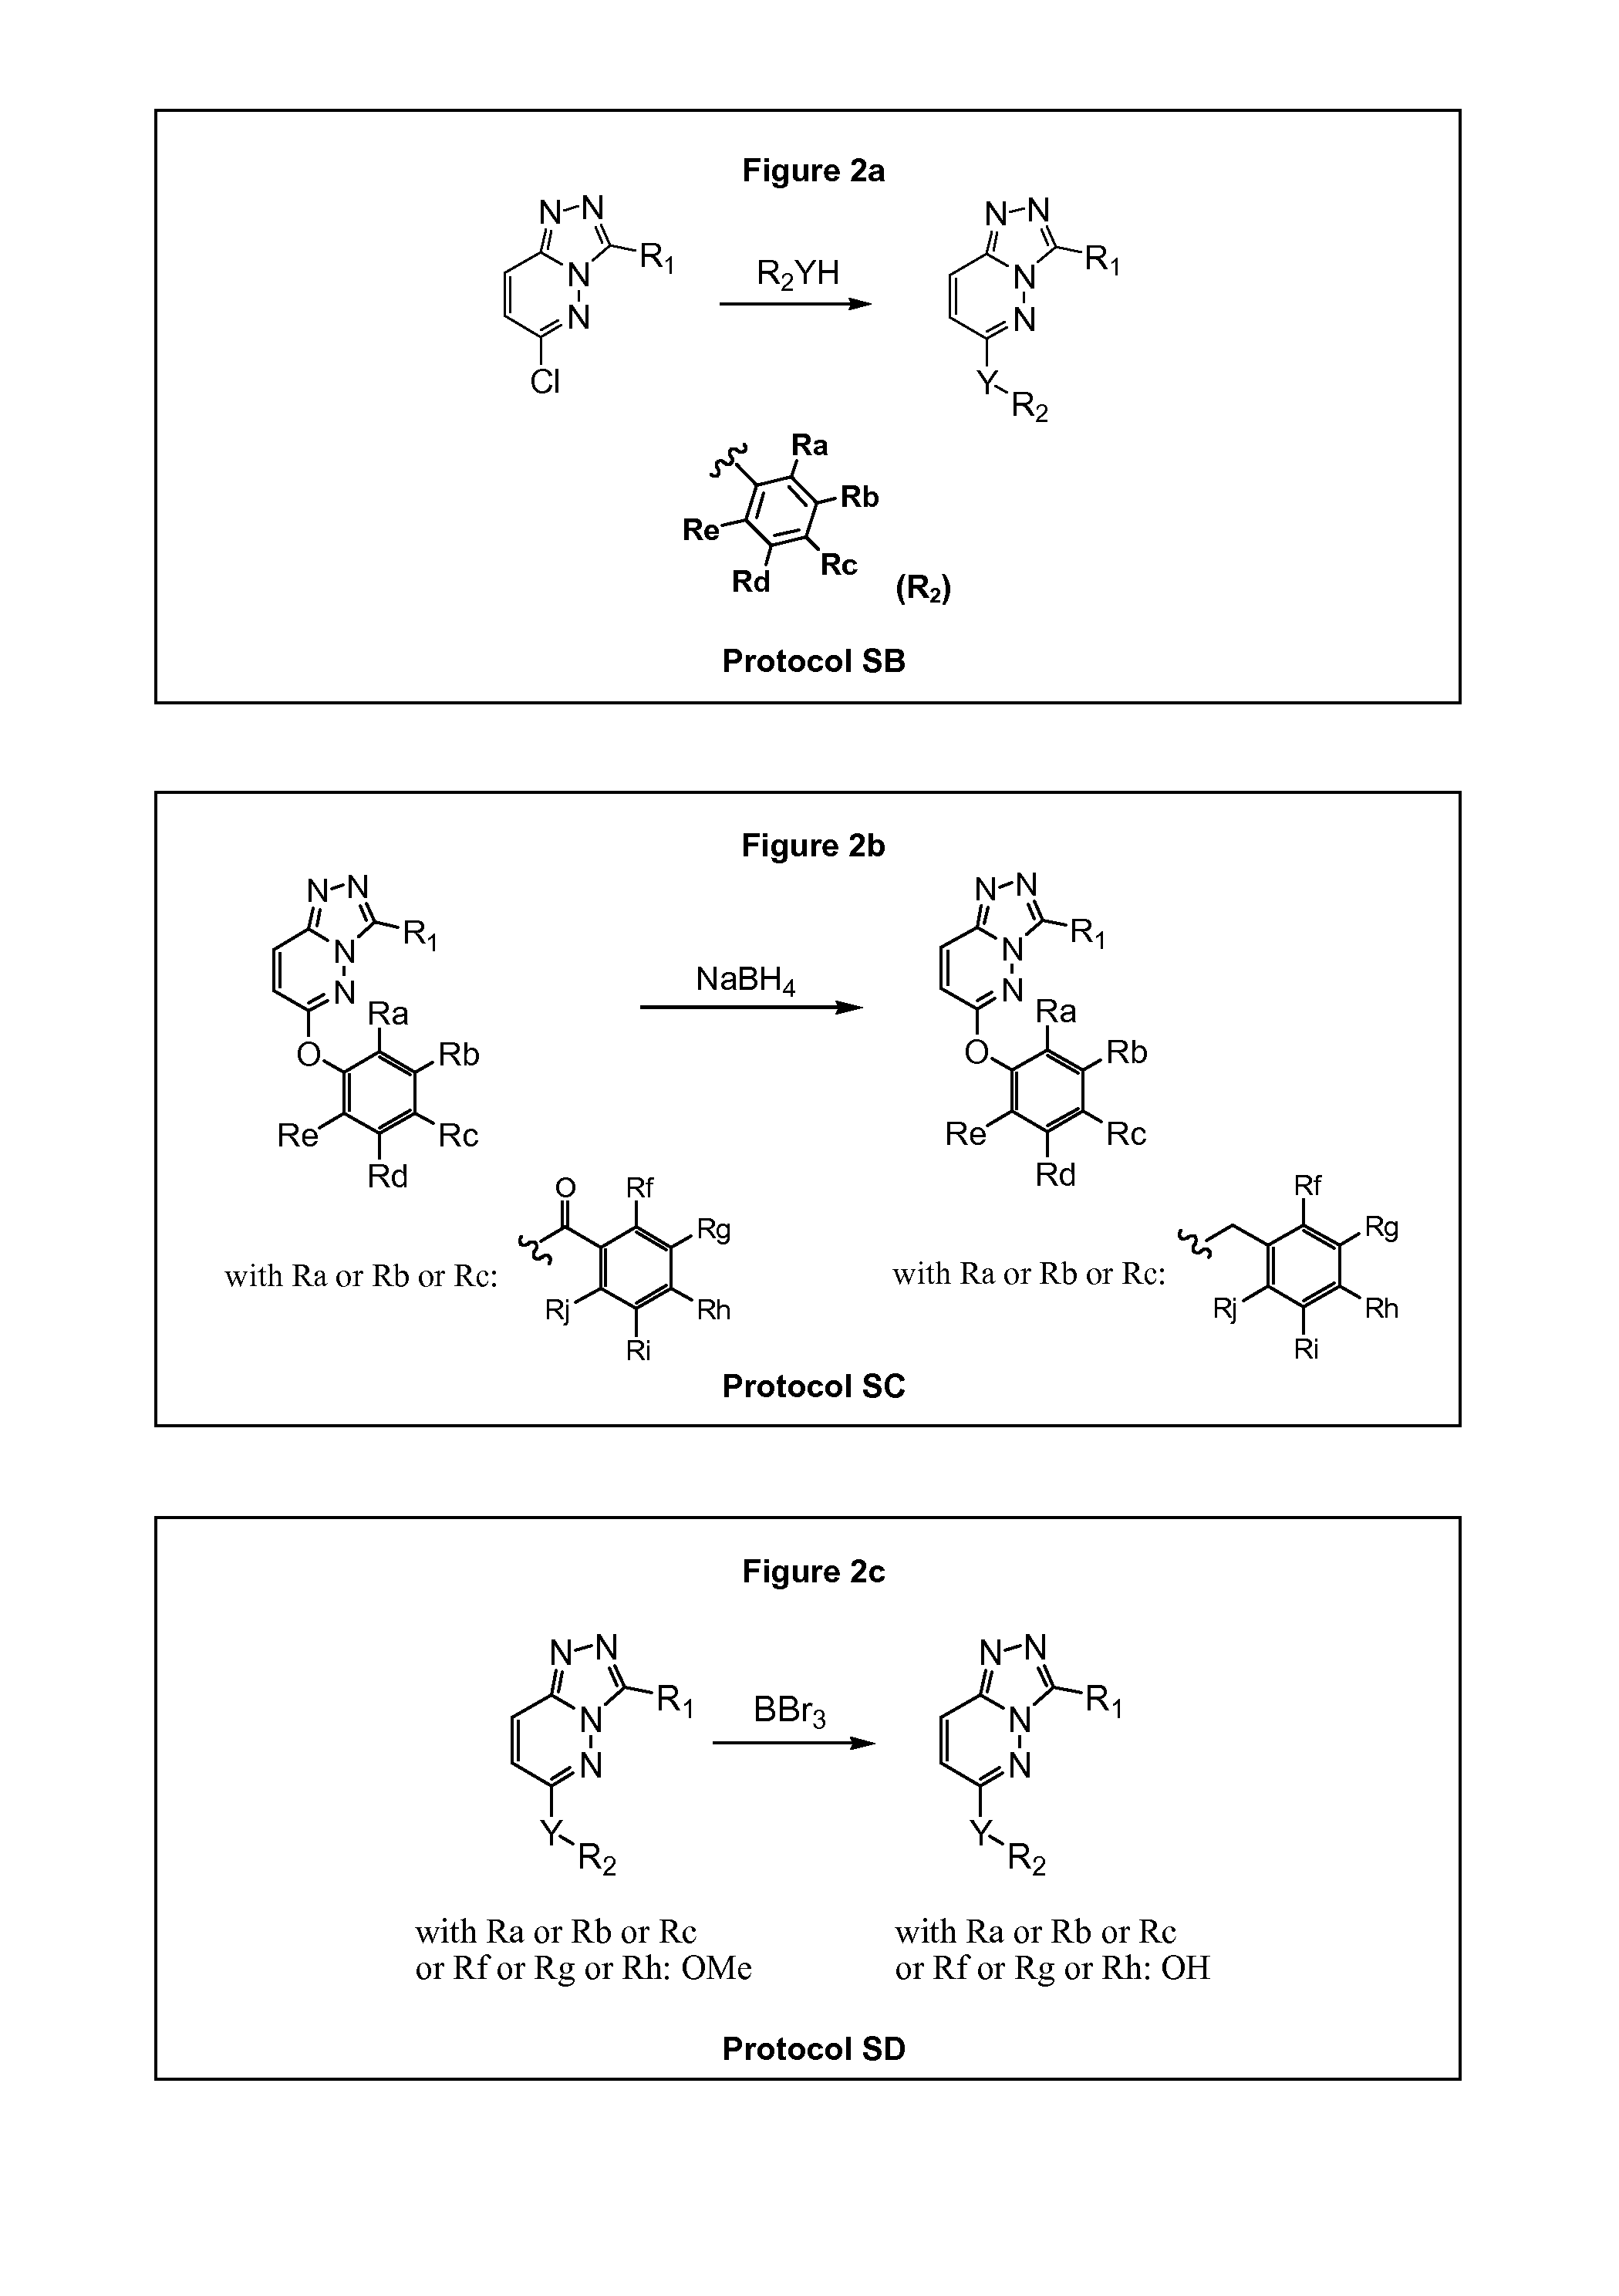 Derivatives of 6-substituted triazolopyridazines as rev-erb agonists